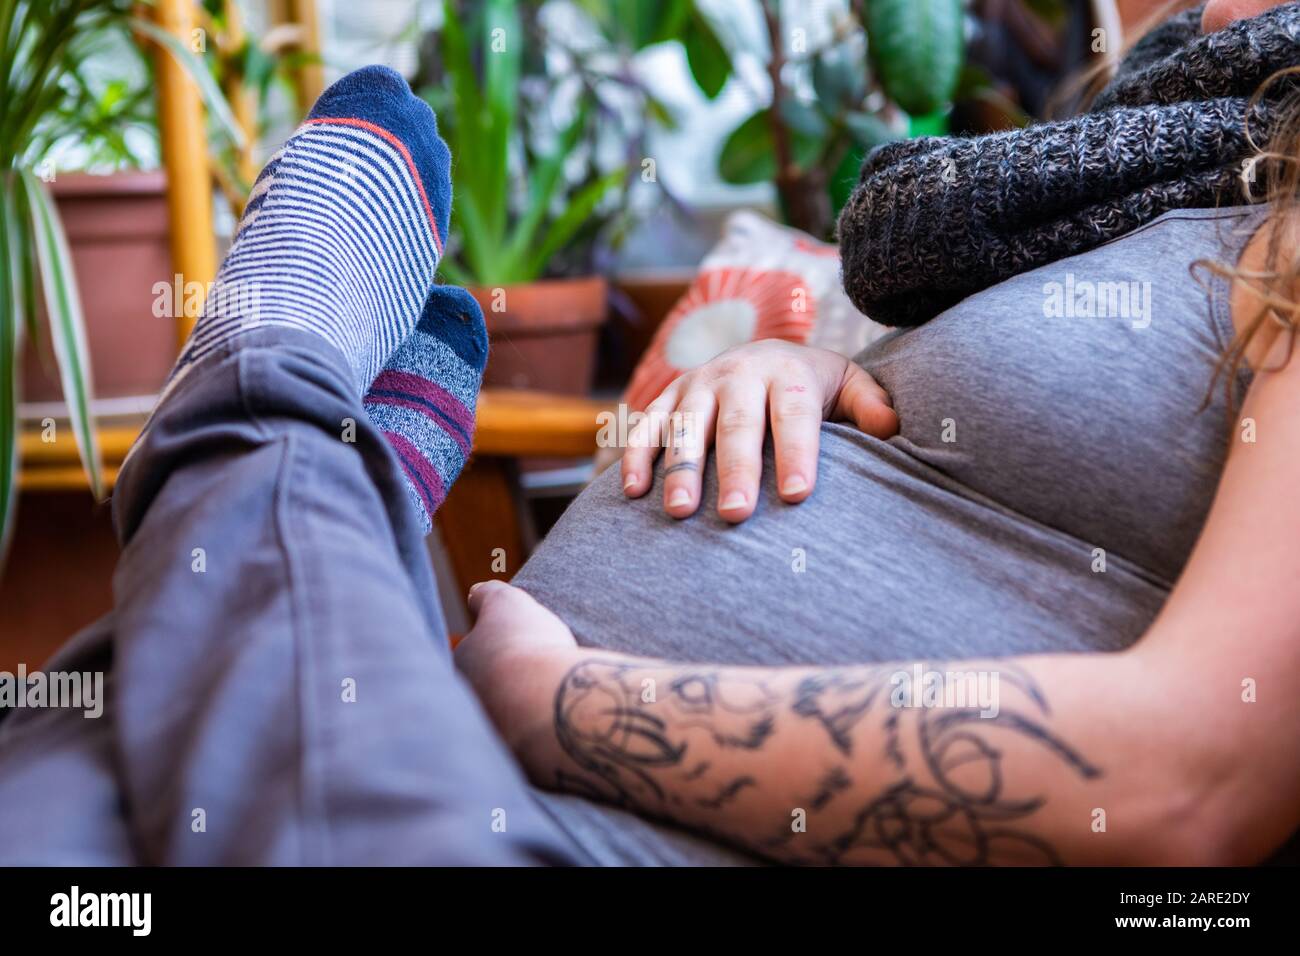 A closeup shot on the feet of a man resting over heavily pregnant partner with large swollen stomach and tattooed arms. Parents await arrival of child Stock Photo